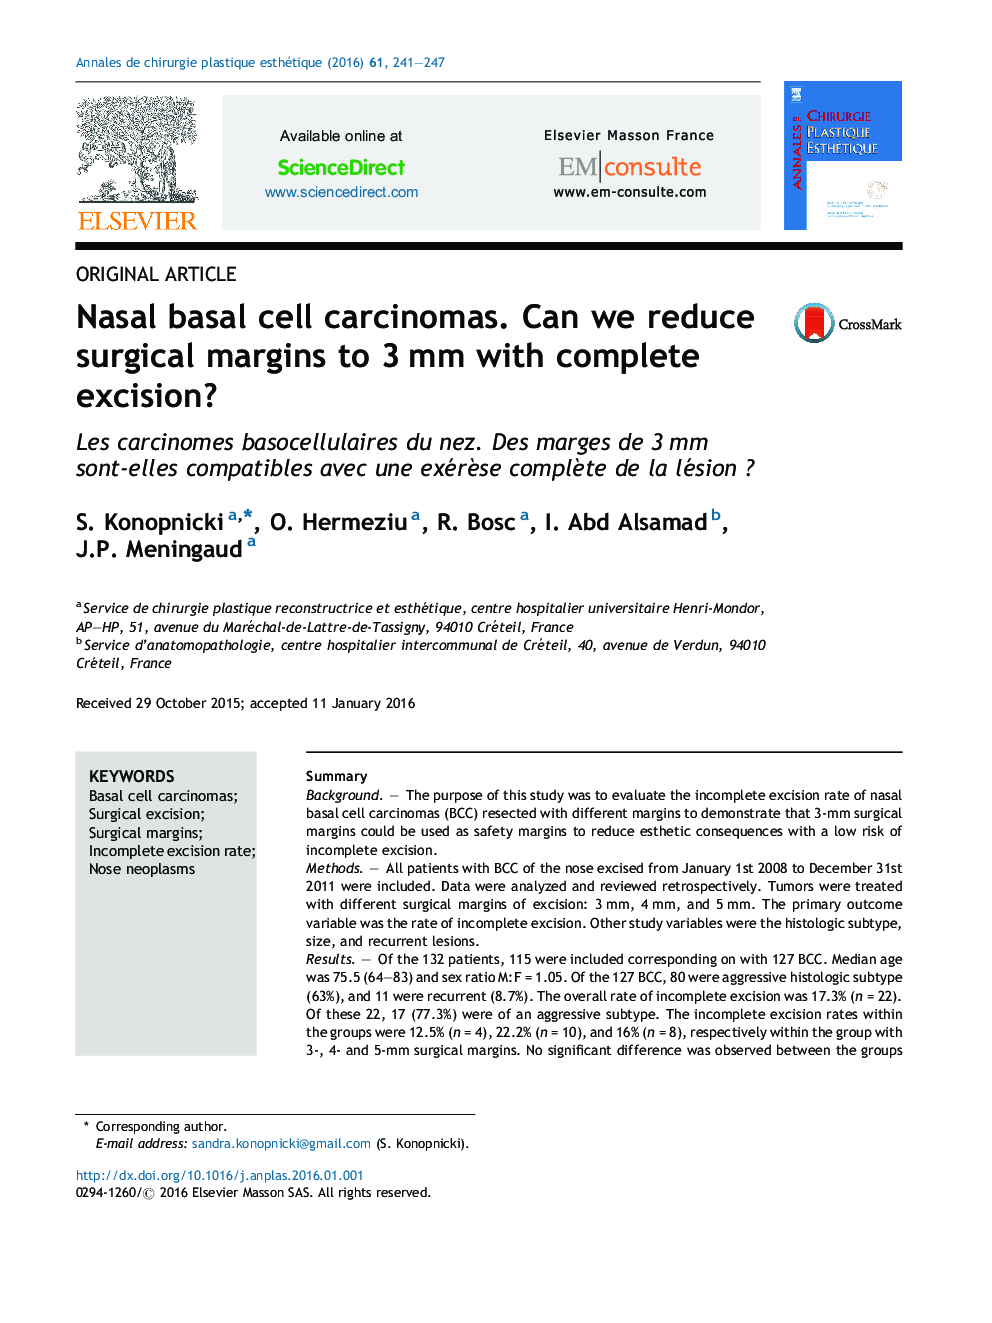 Nasal basal cell carcinomas. Can we reduce surgical margins to 3 mm with complete excision?